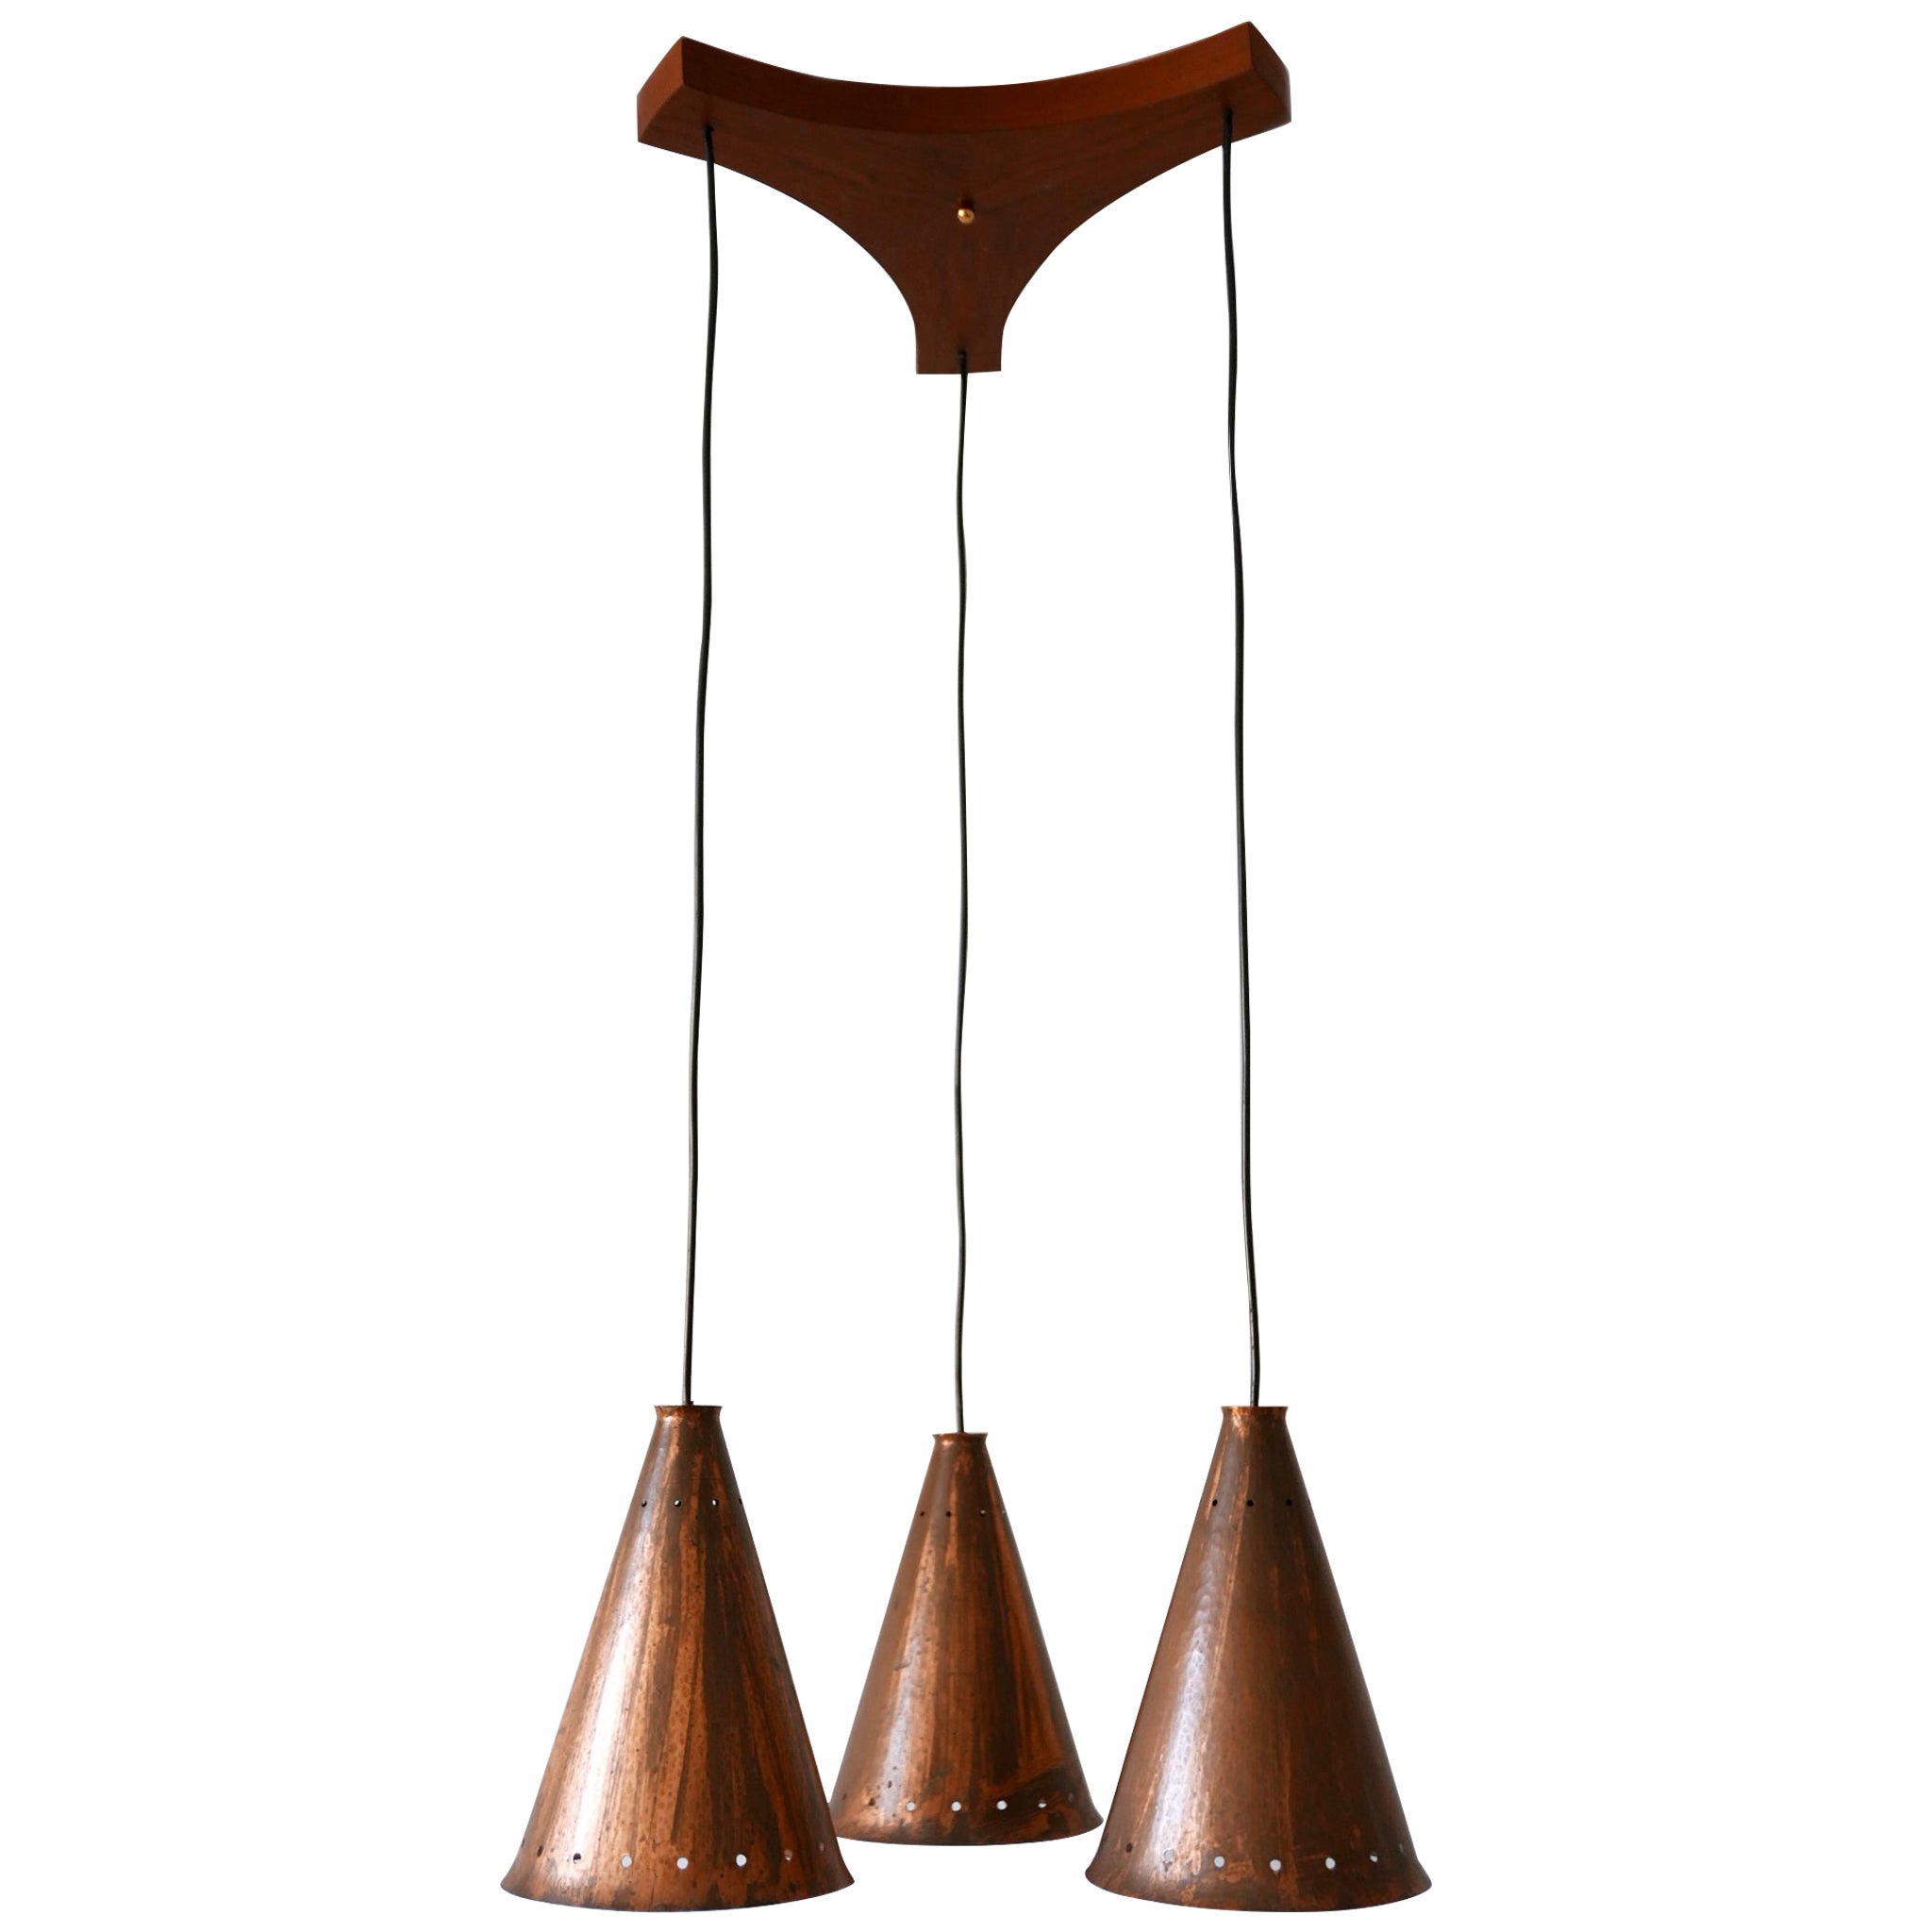 Exceptional & Large Mid-Century Modern Copper Pendant Lamp Scandinavia, 1950s For Sale